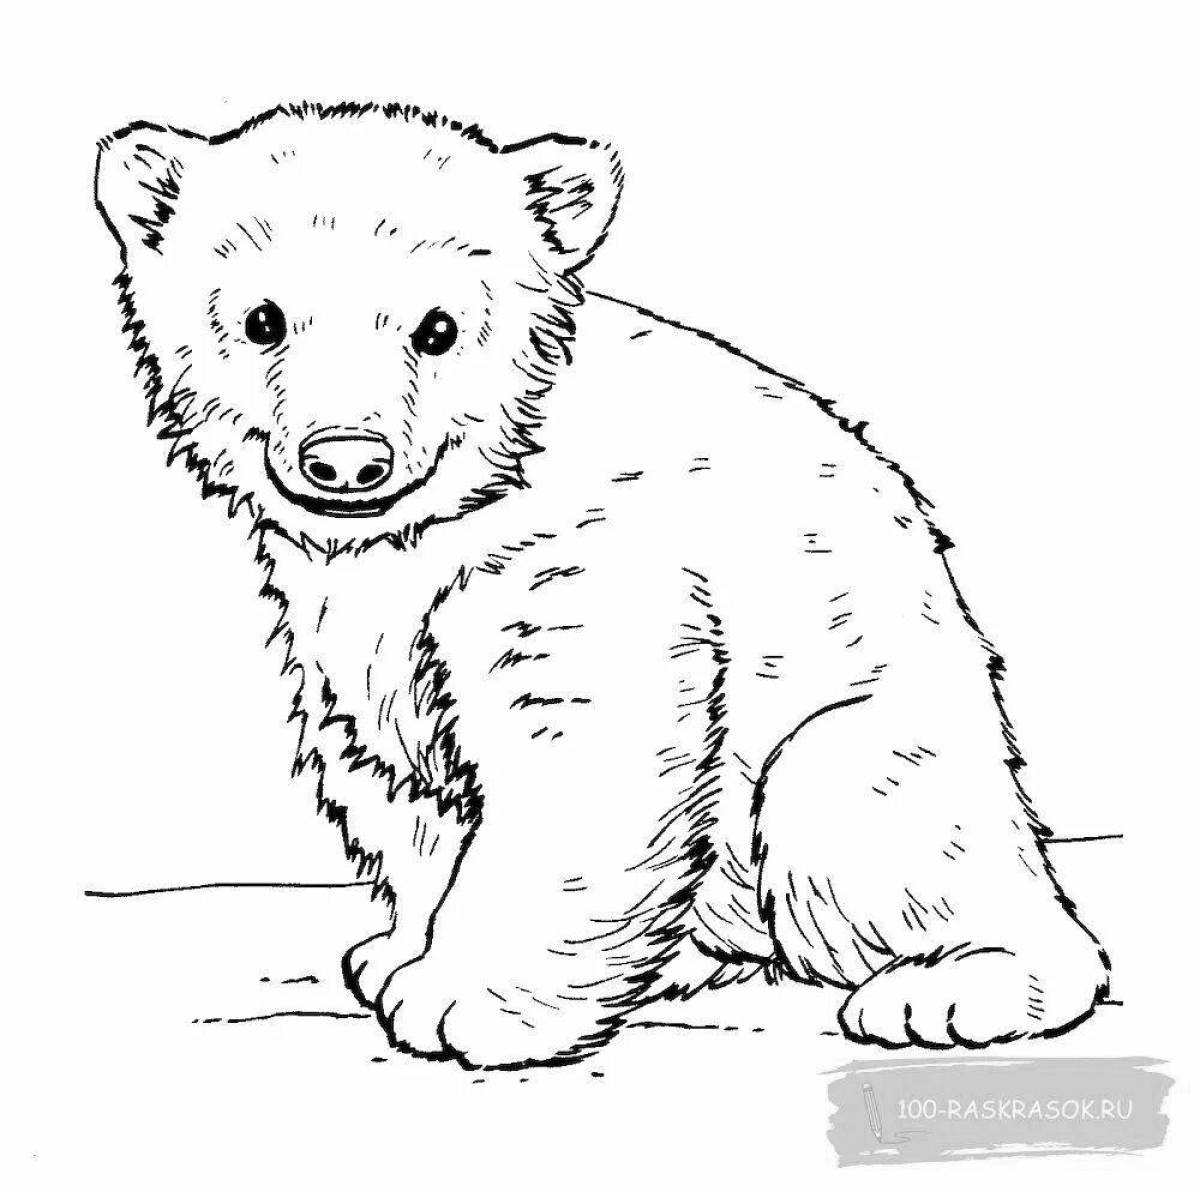 Cute white teddy bear coloring page